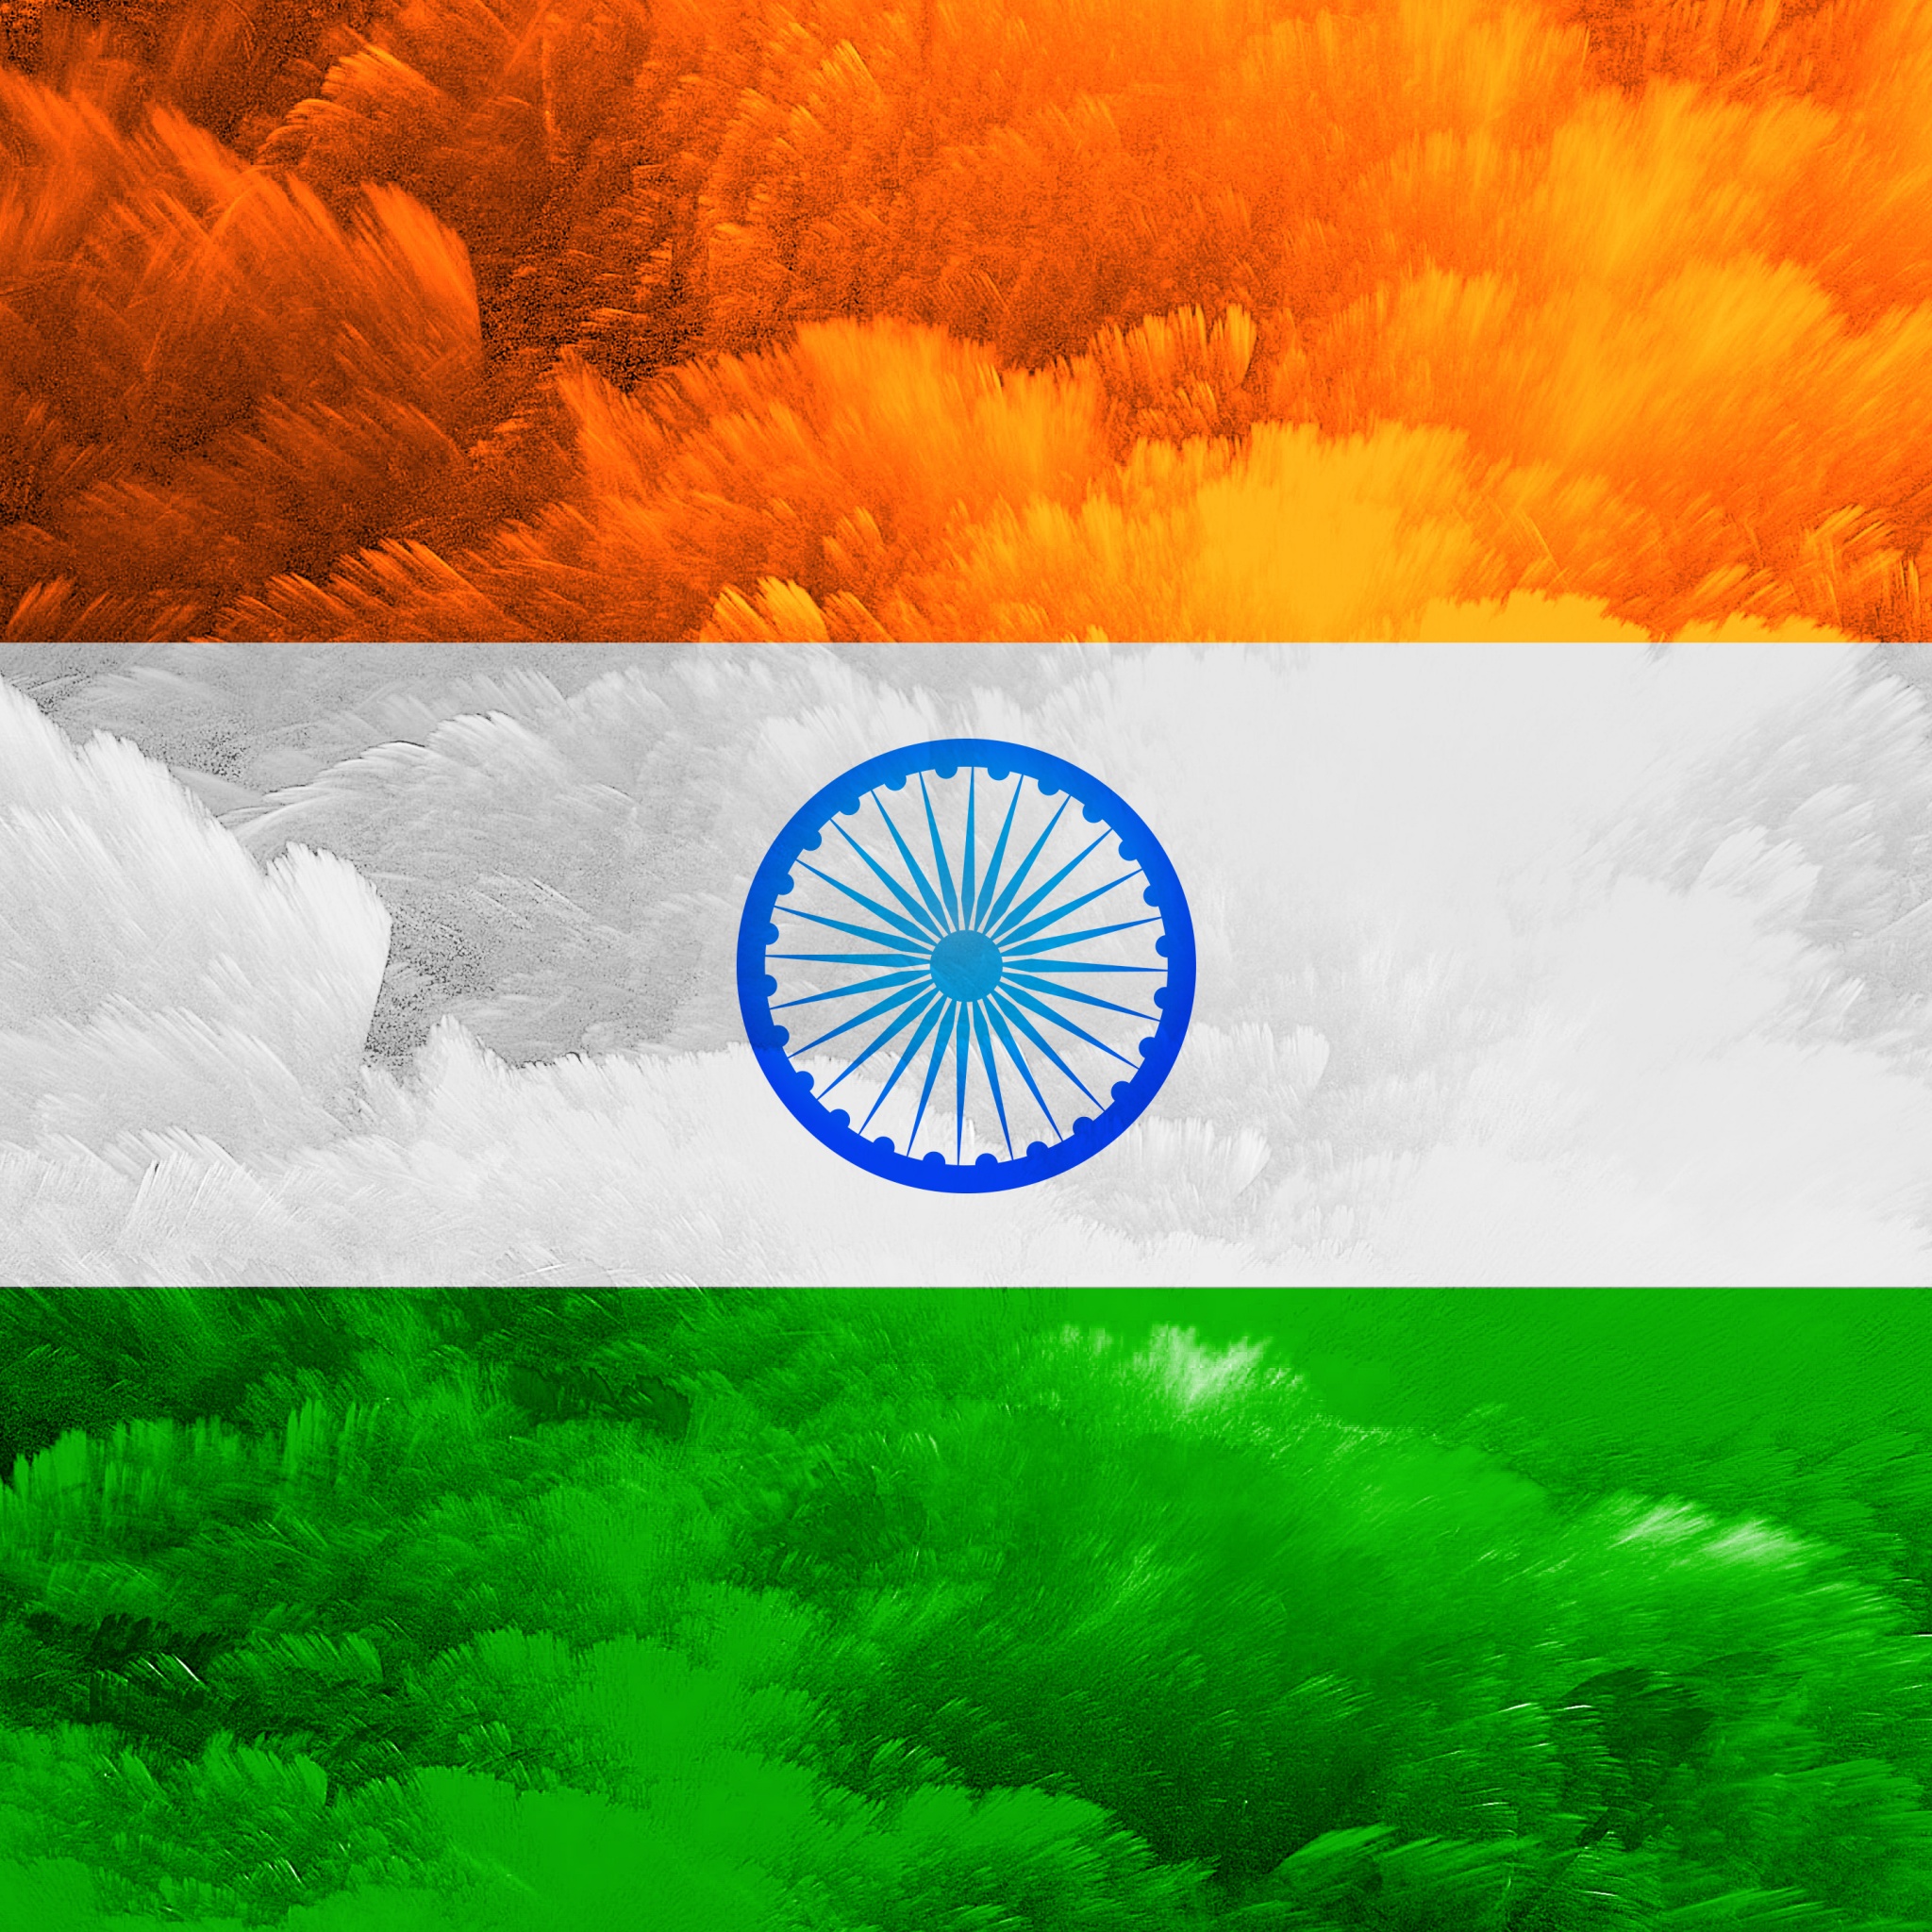 India Flag Wallpaper Ghaziand City Flag Stock Photo - Image of ghaziand,  india: 211863370